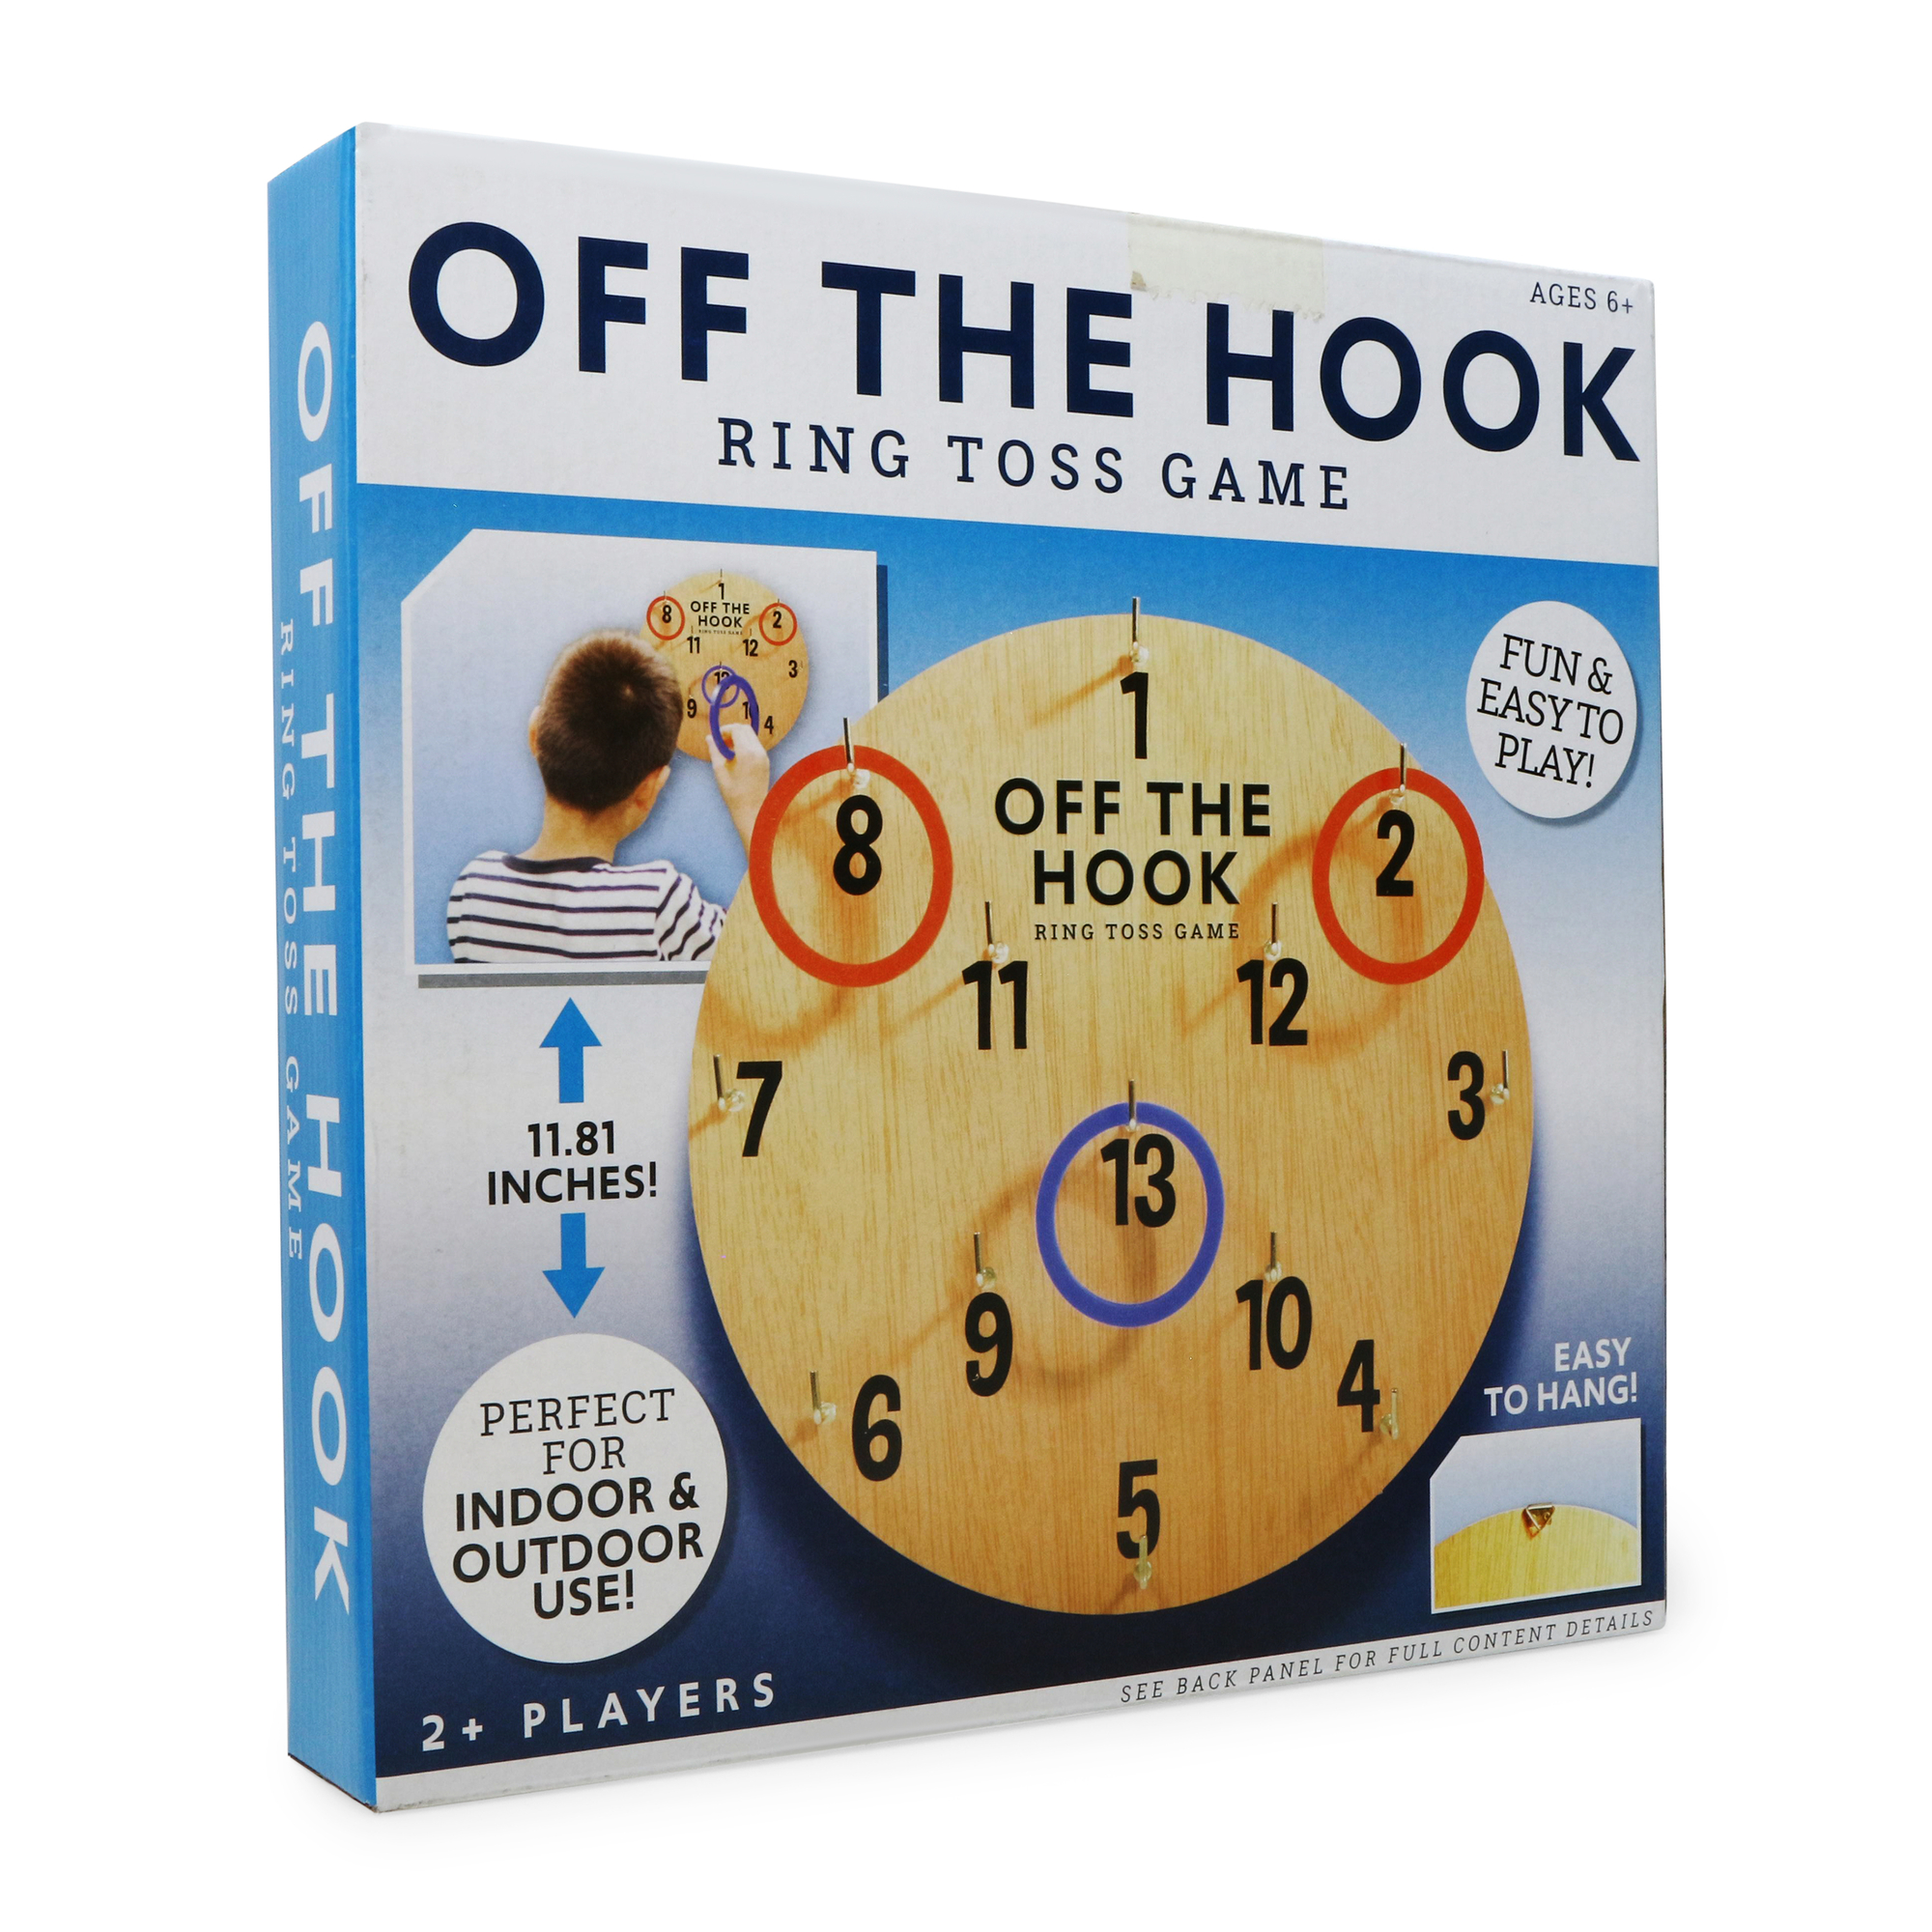 Hook and Ring Toss Game - Throwing Games for Family Fun